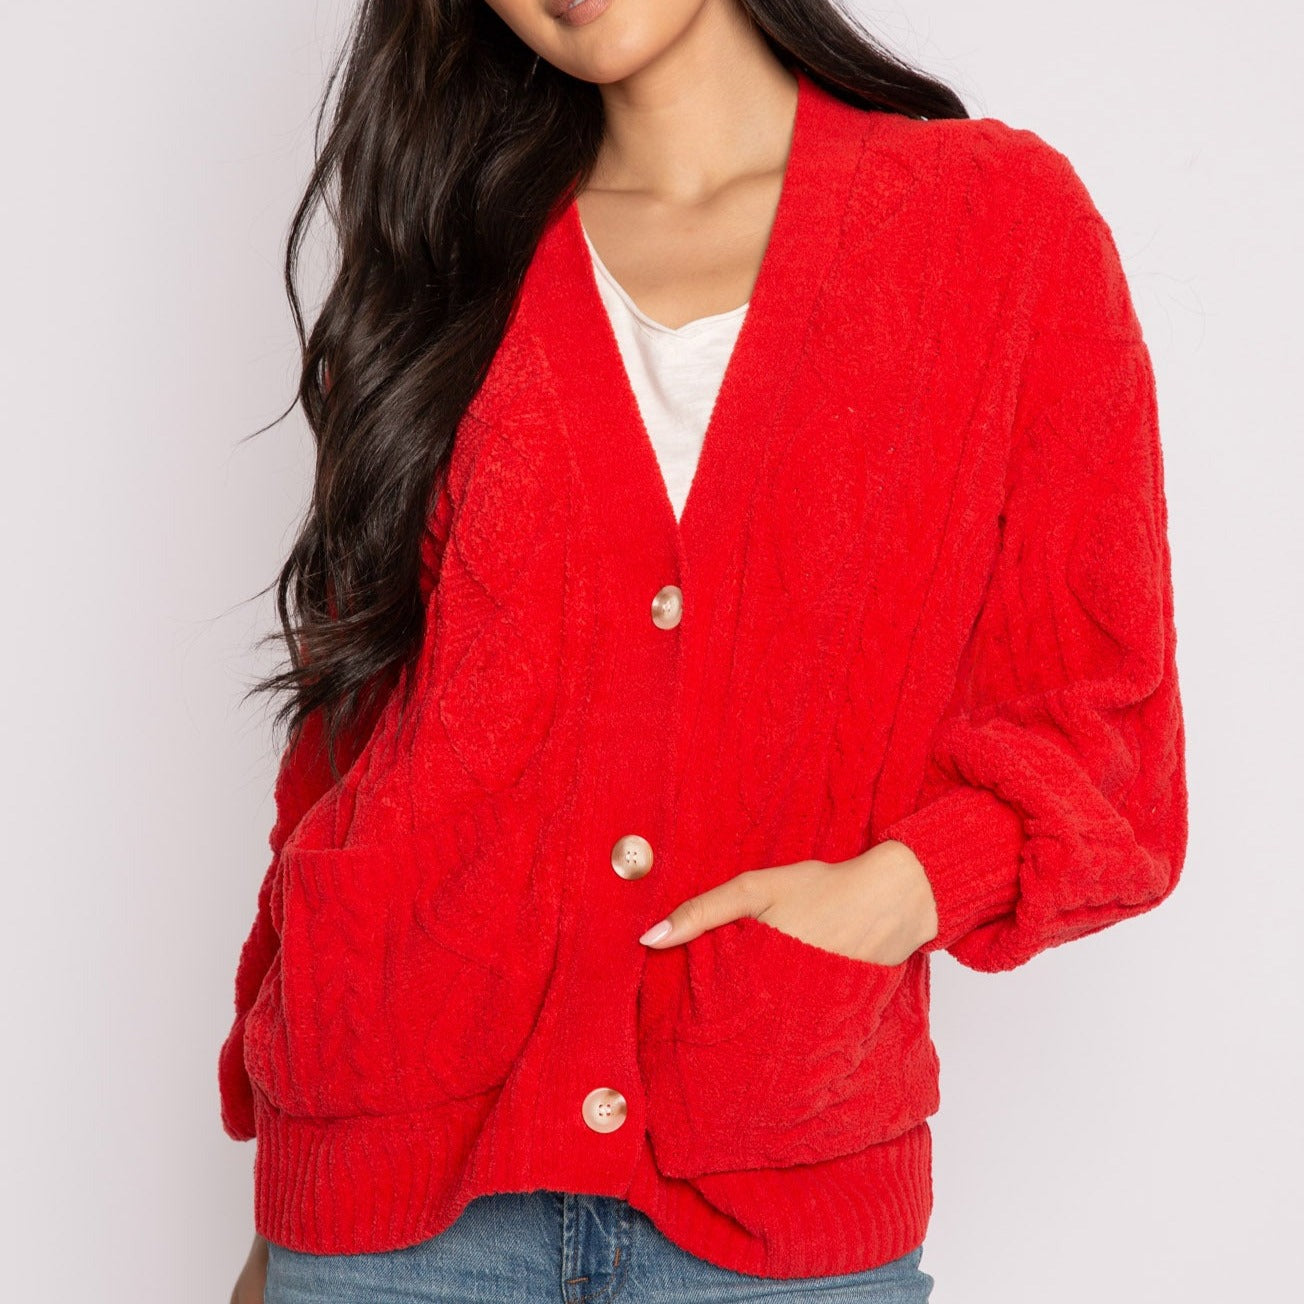 Forever Festive Cable Cardigan Sweater - RLFFCA - Scarlet Unclassified P.J. Salvage RED M/L 